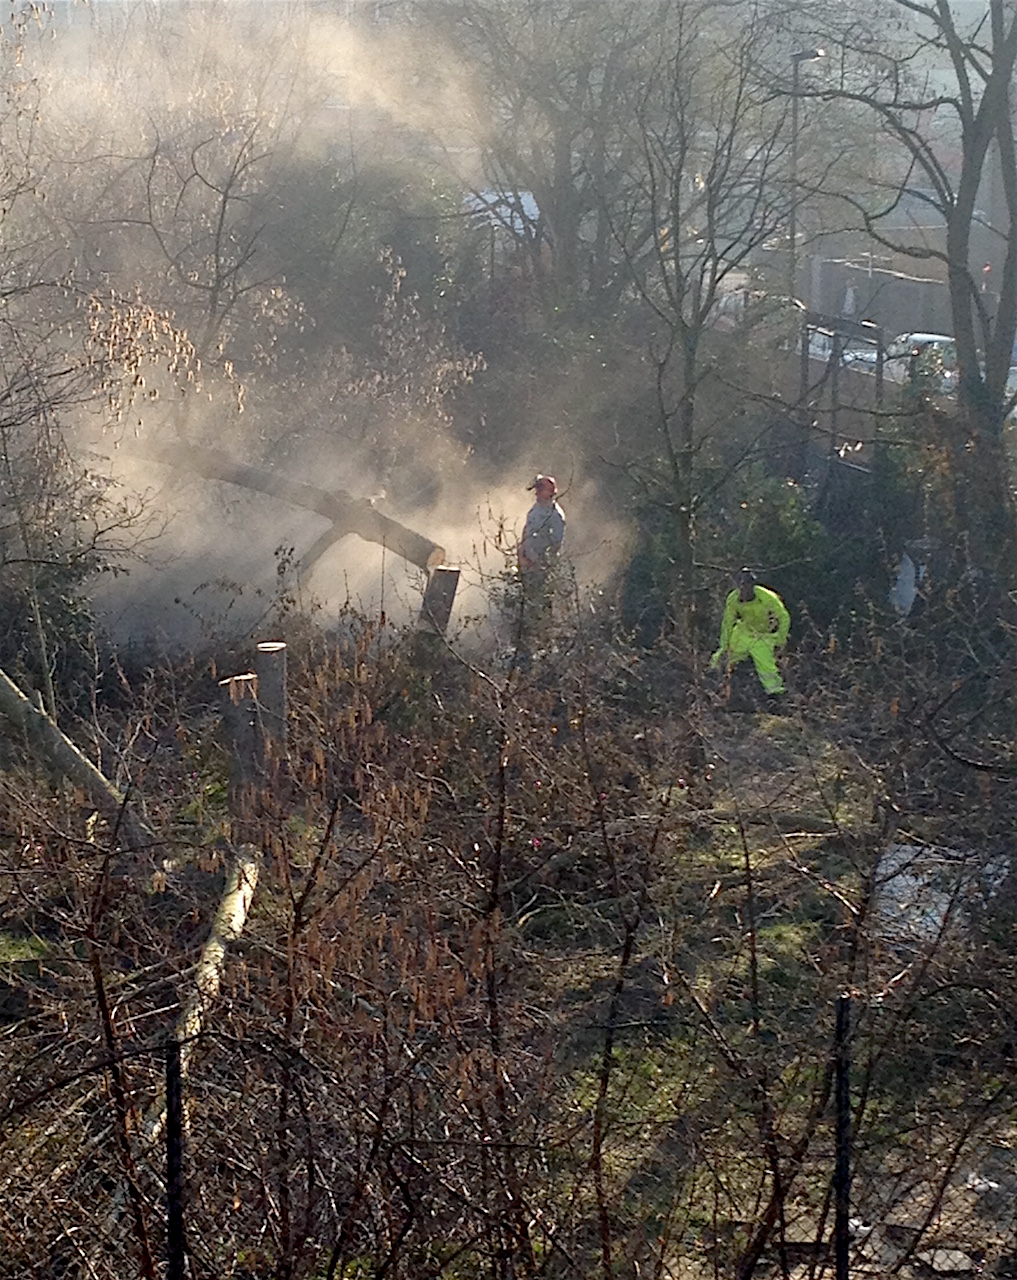 The destruction of the Old Tidemill Wildlife Garden on February 27, 2019 (photo by David Aylward).